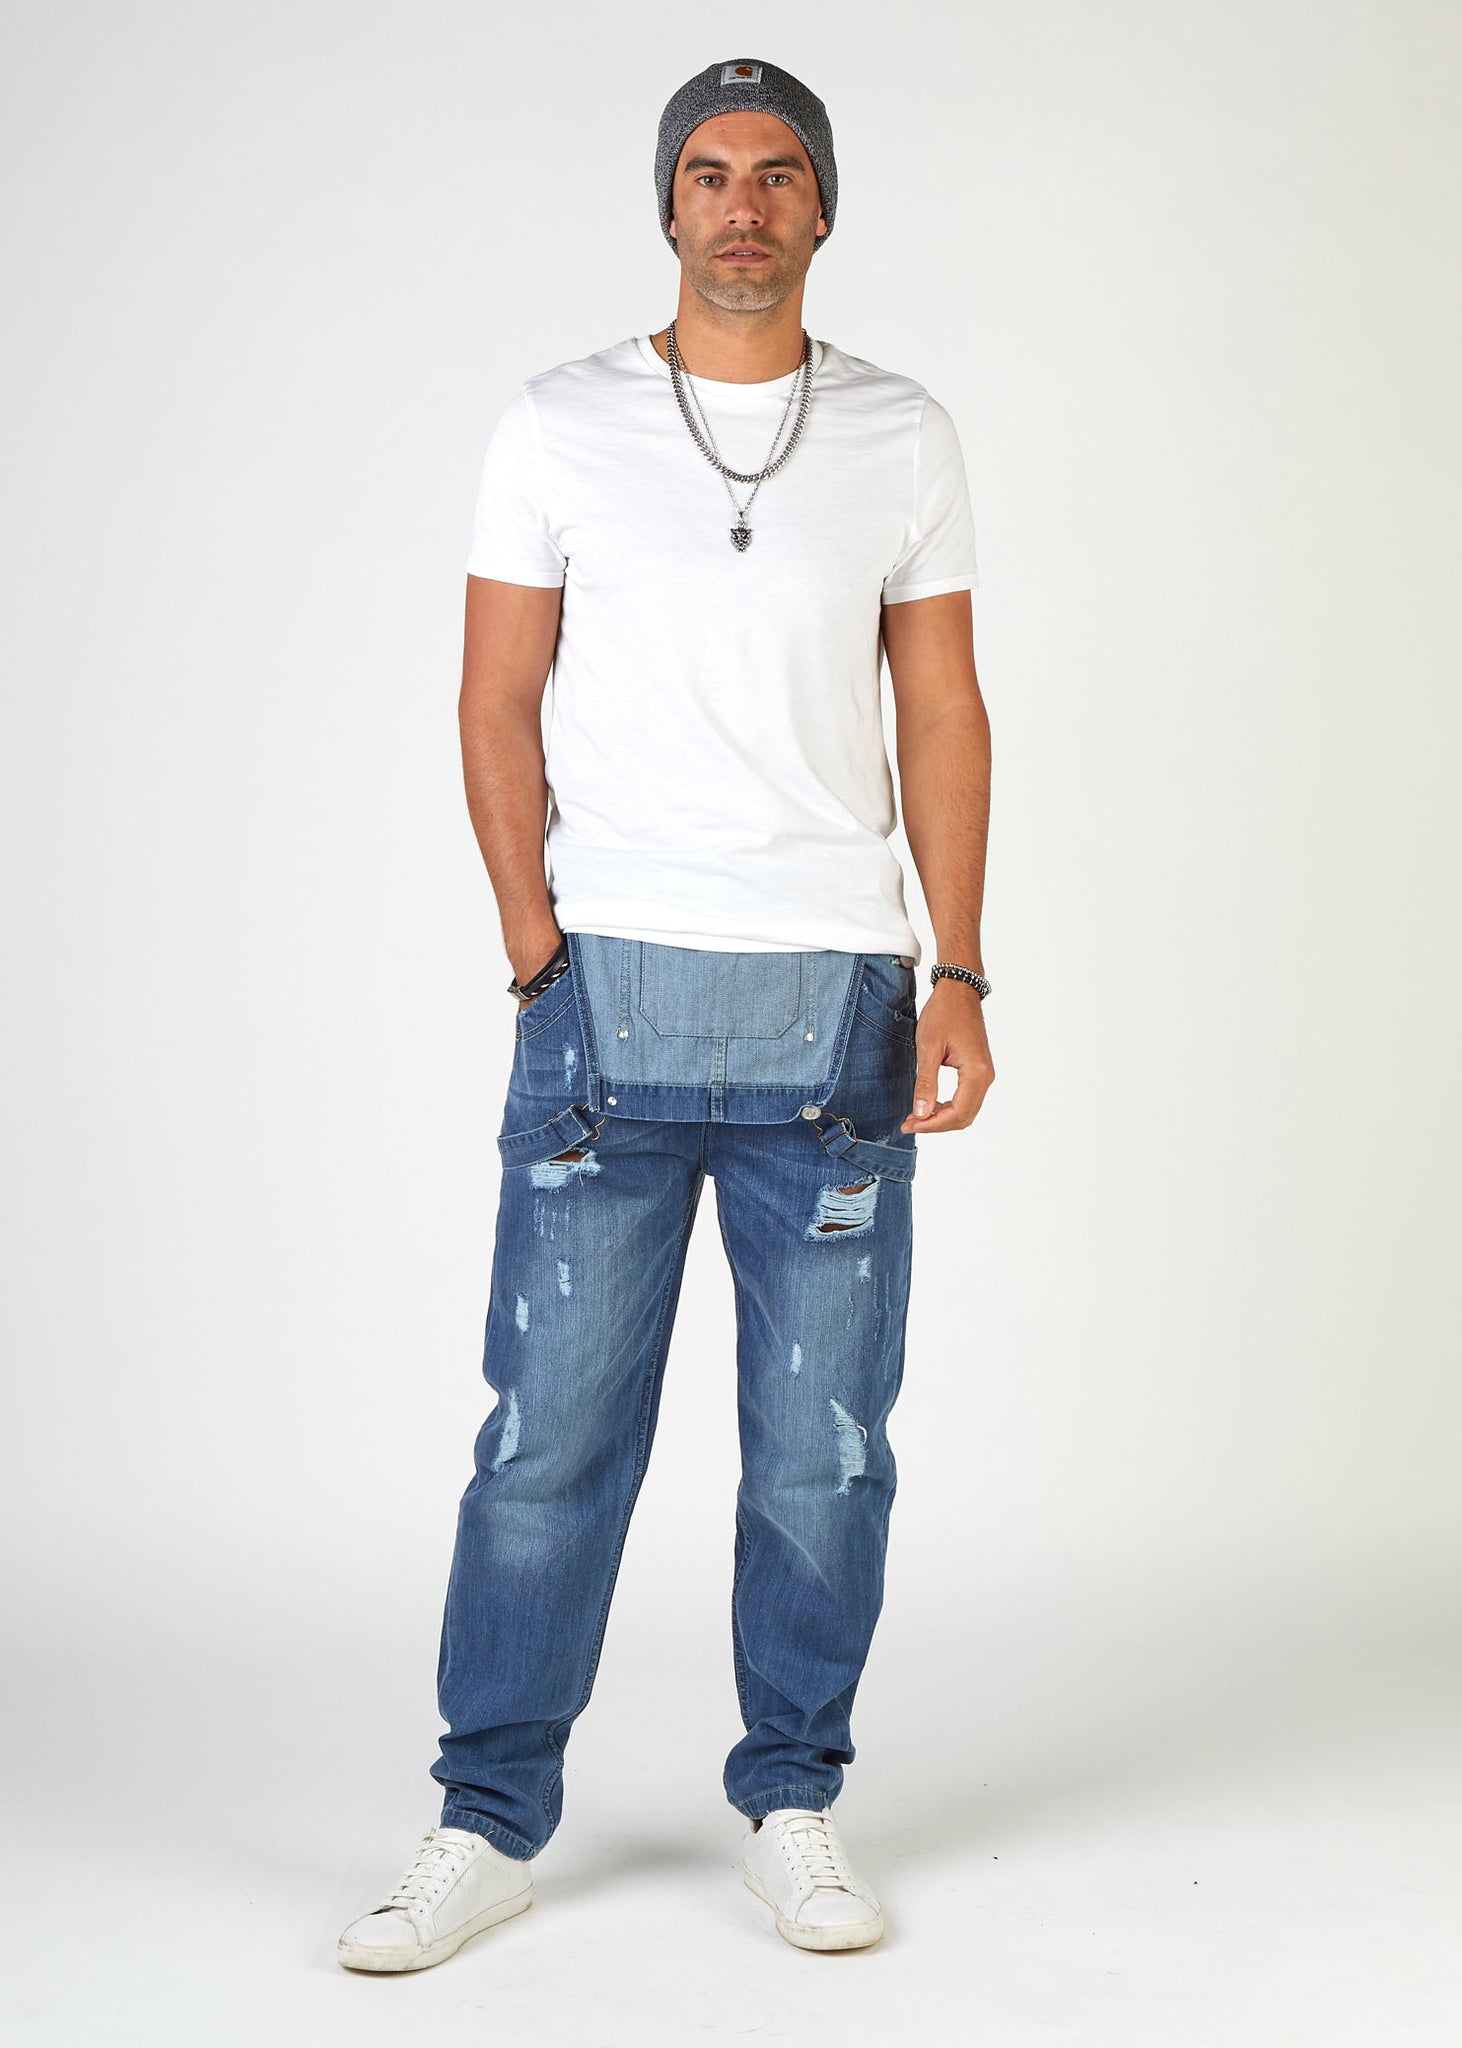 Full-length front view men's dungarees, with bib down, revealing white t-shirt. Wearing 'Bertie' brand relaxed fit ripped dungarees from Dungarees Online.